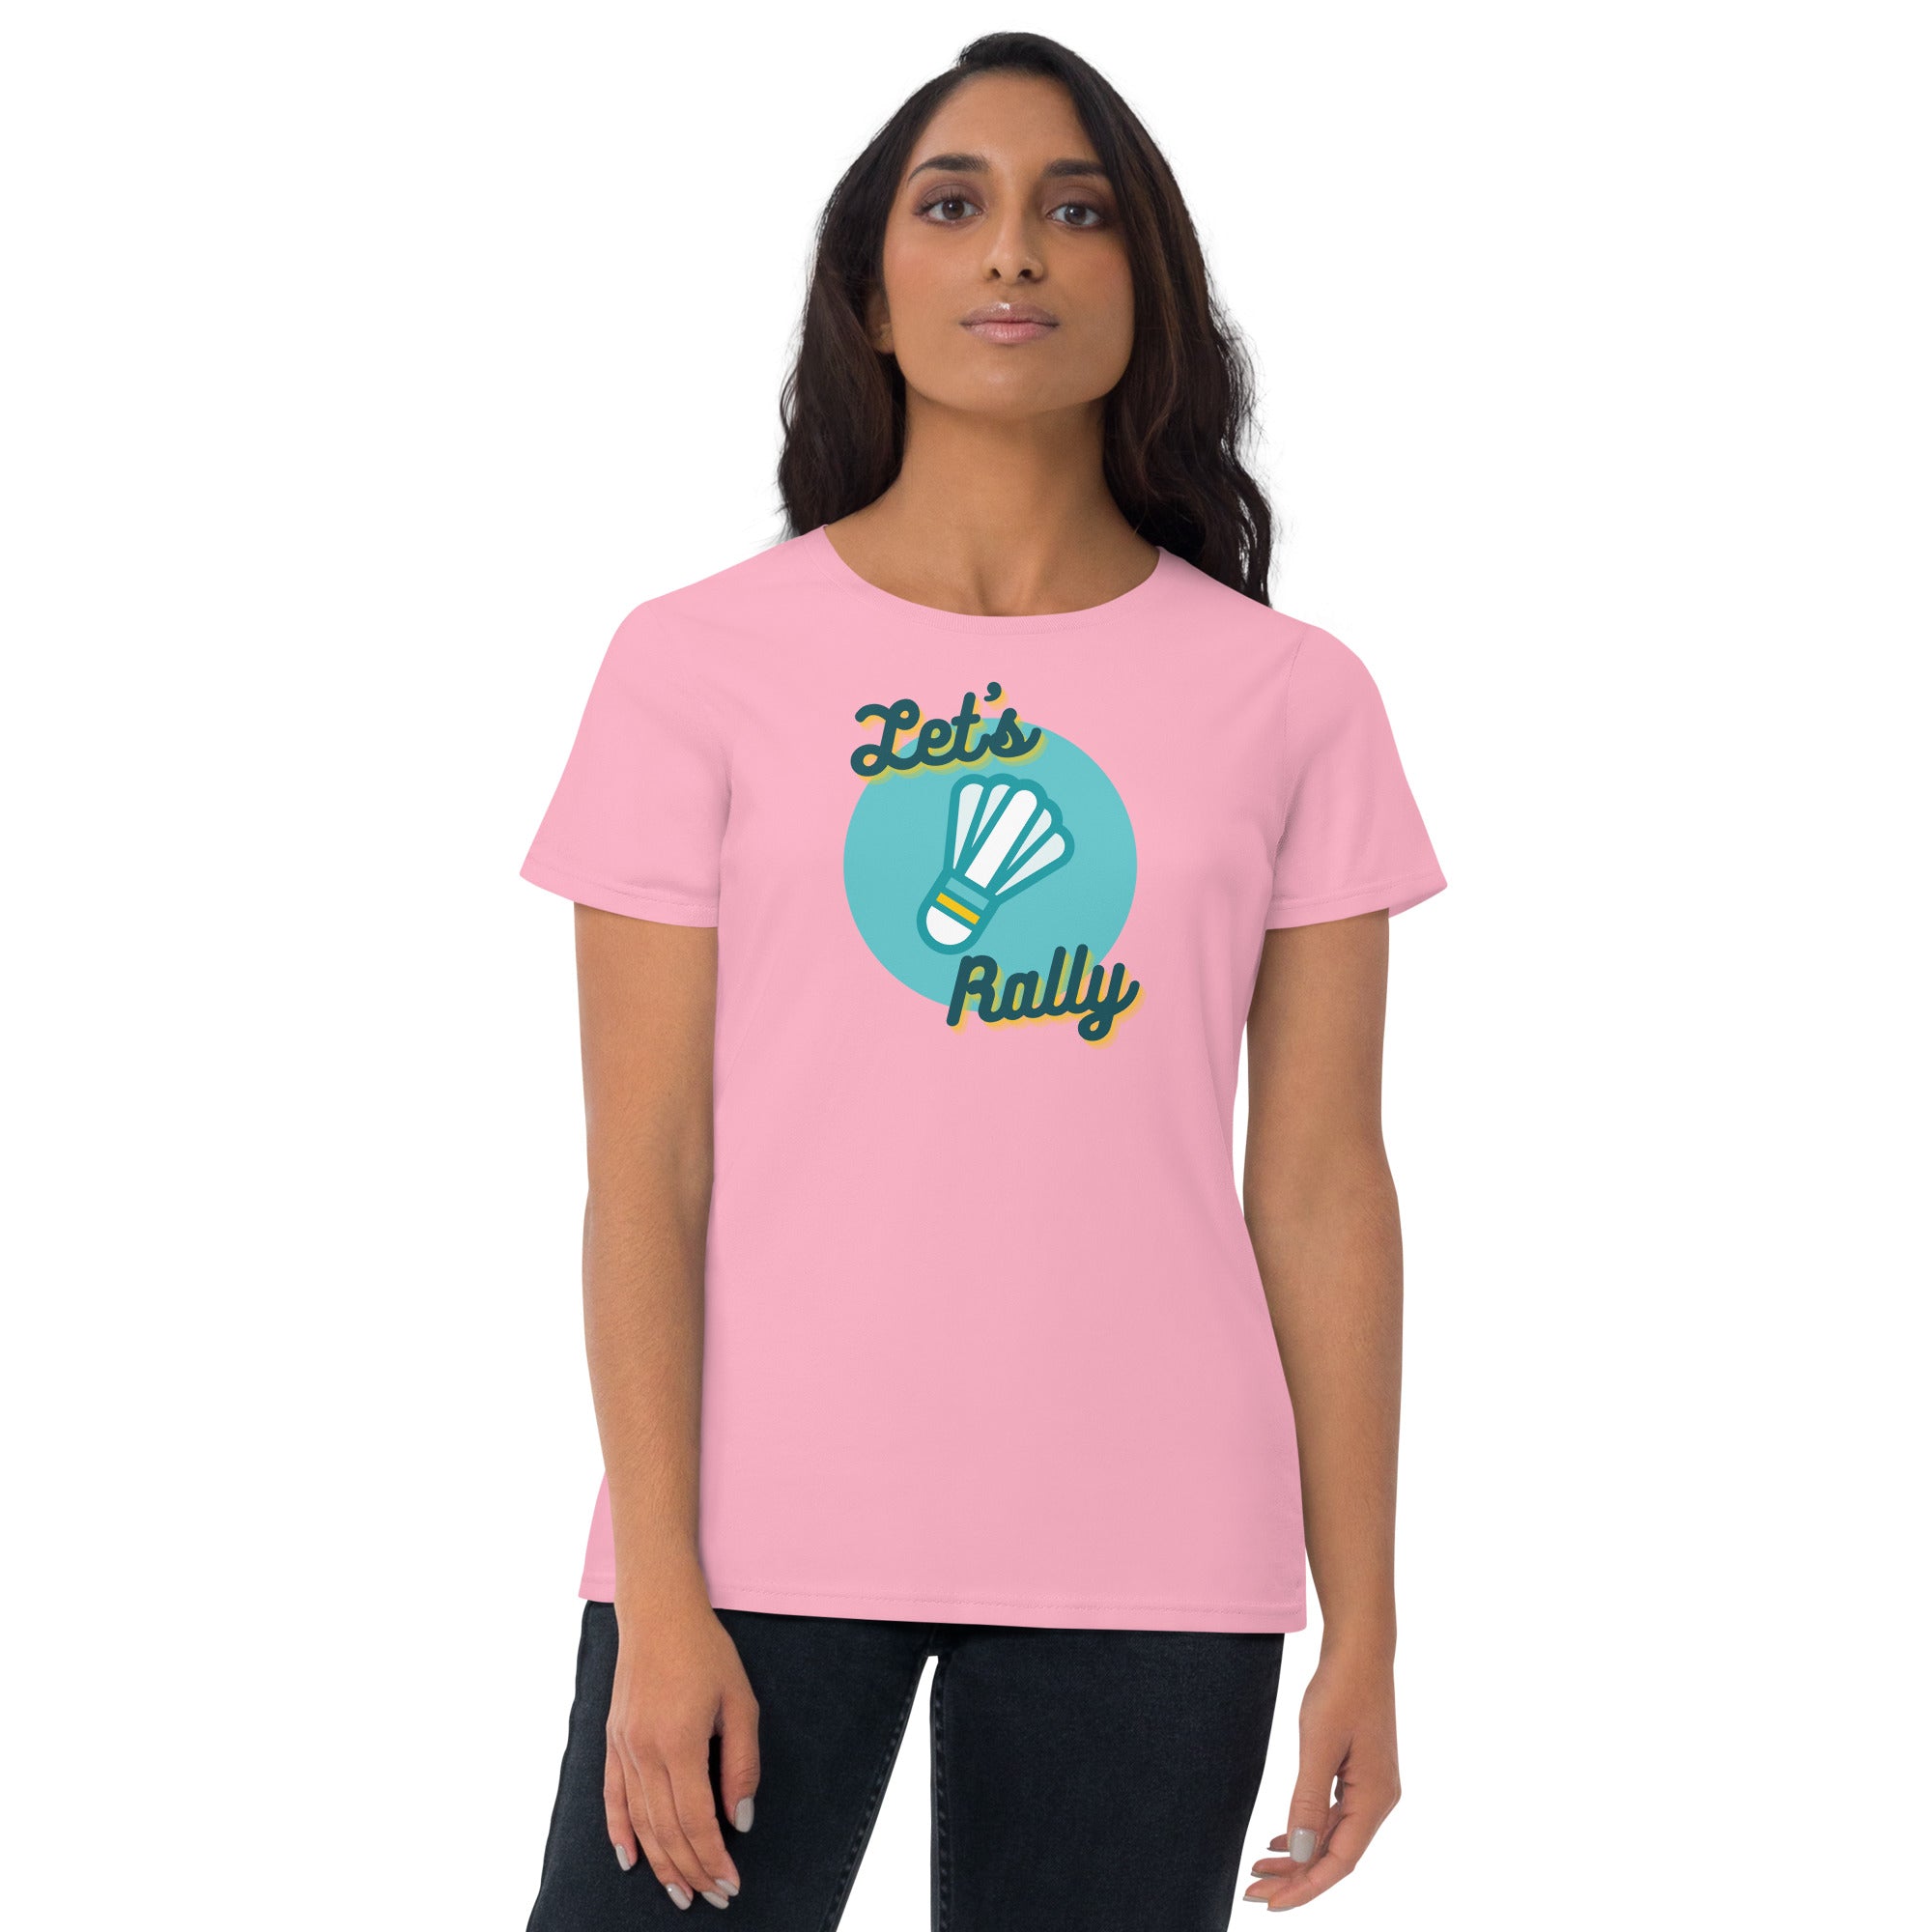 Let's Rally Women's Fitted T-Shirt